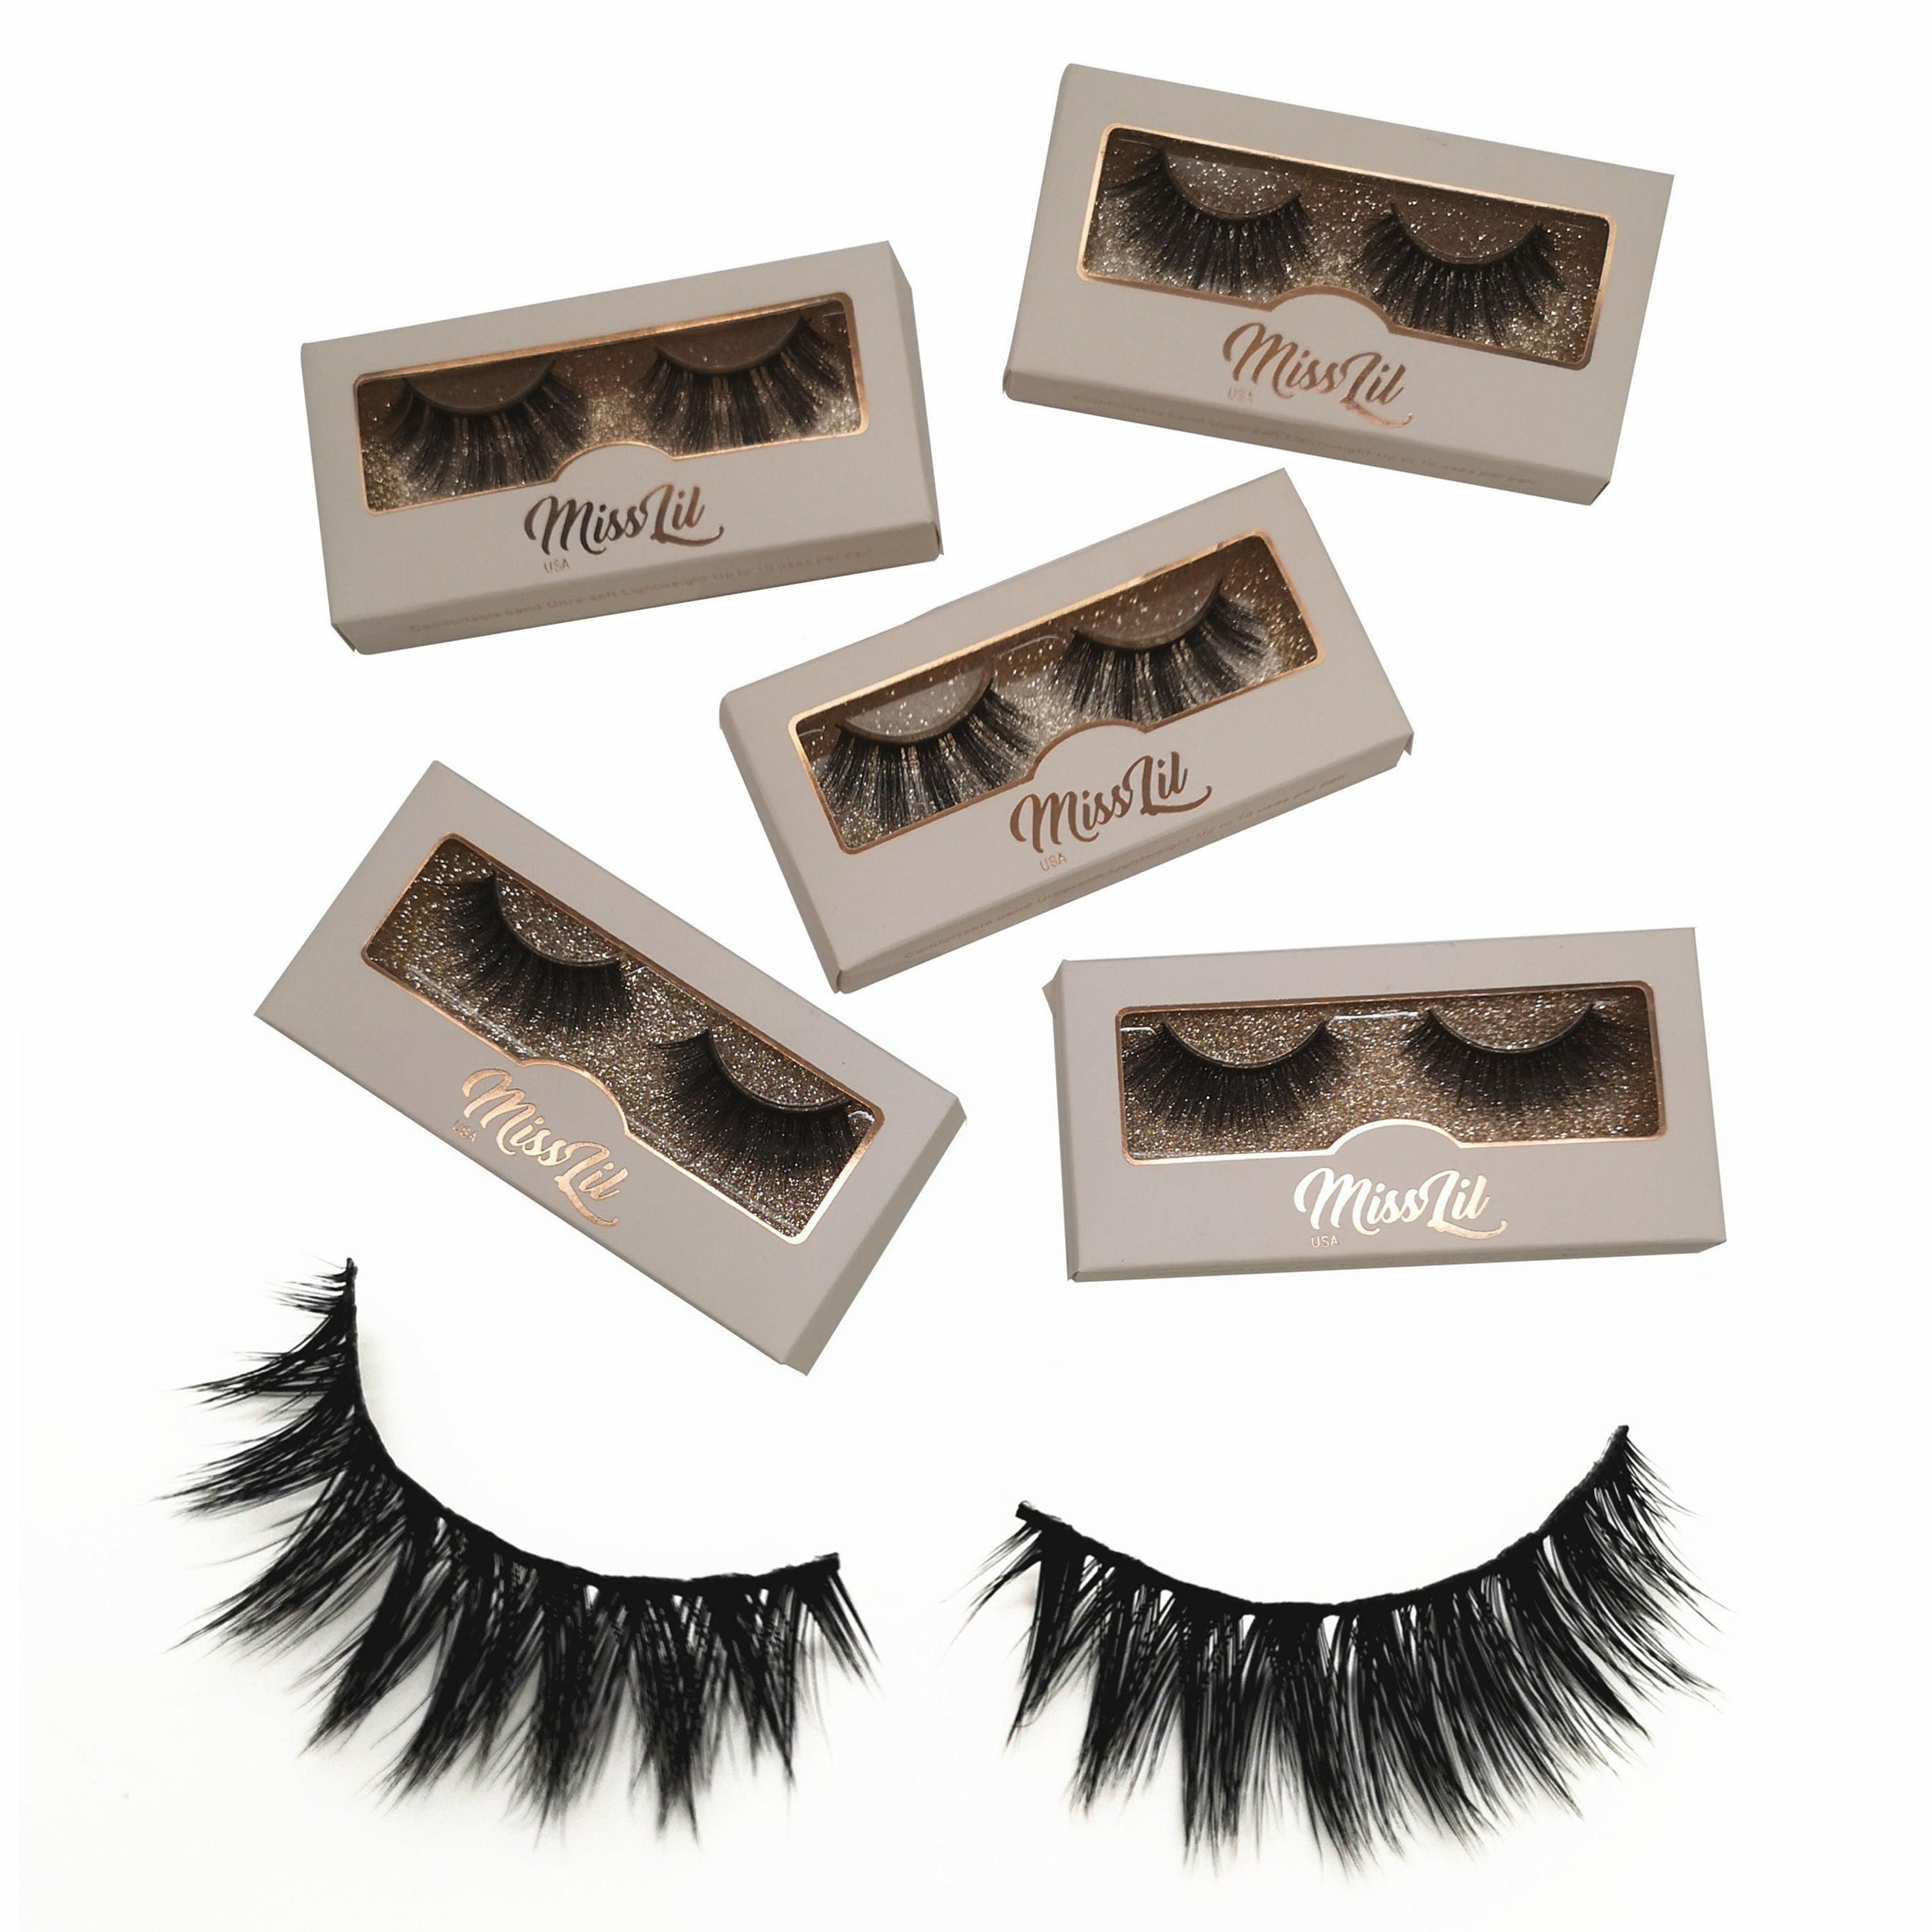 1 Pair Miss Lil USA Lashes #9 (Pack of 12) - Miss Lil USA Wholesale